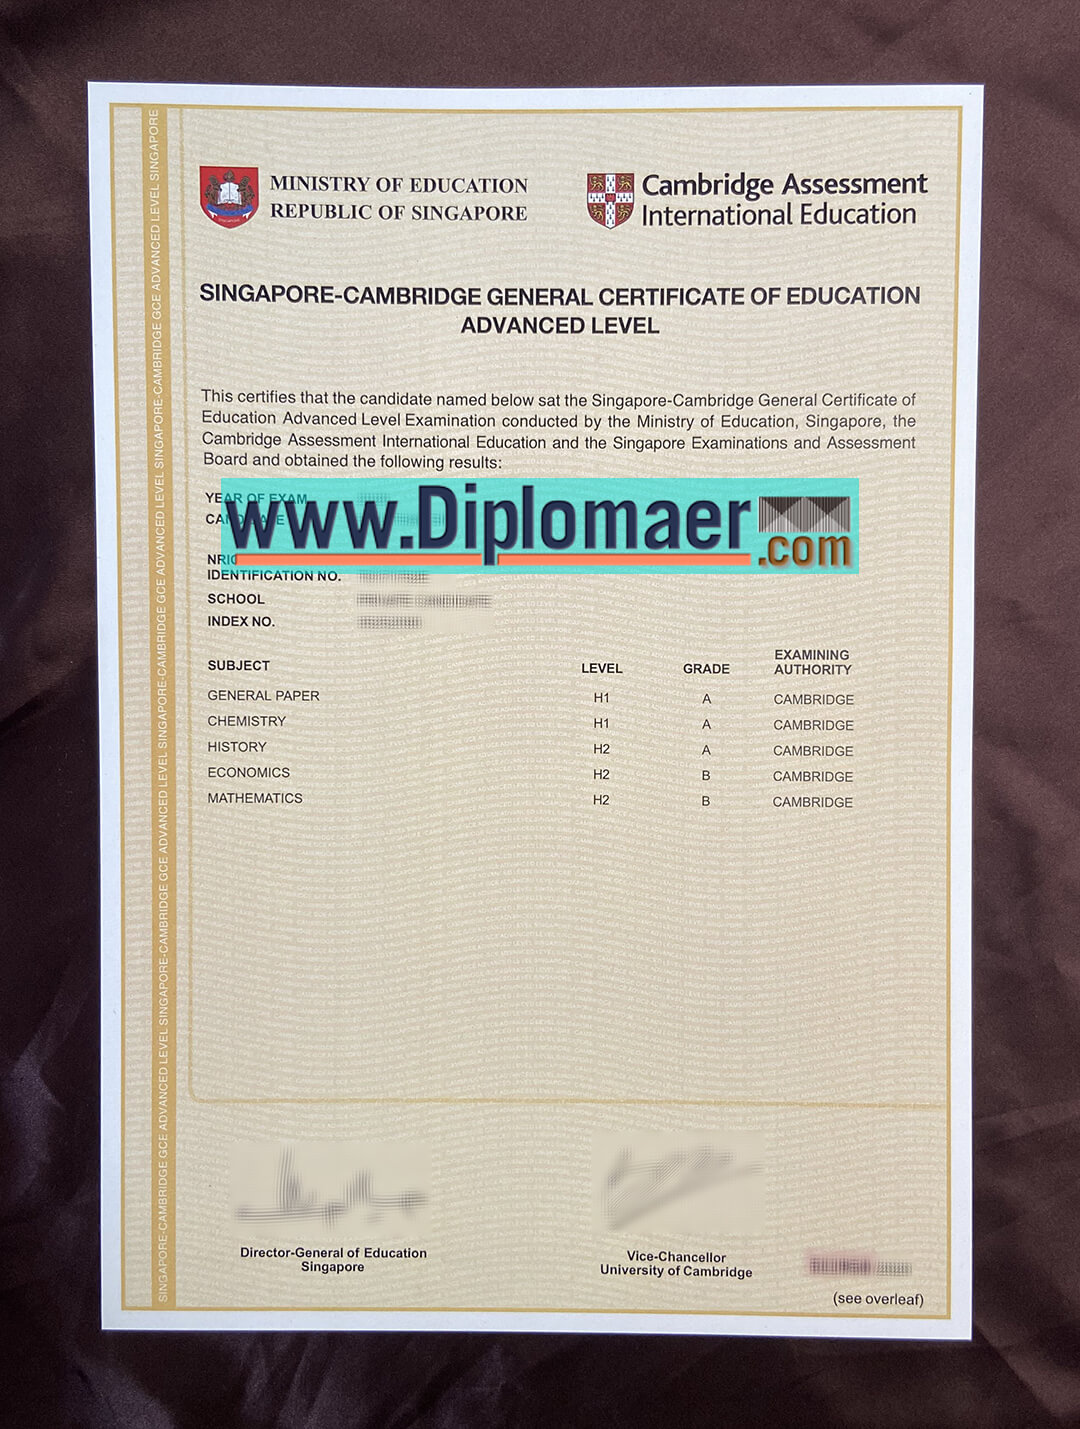 Singapore GCE O Level fake diploma - what is a Singapore-Cambridge GCE A Level certificate?